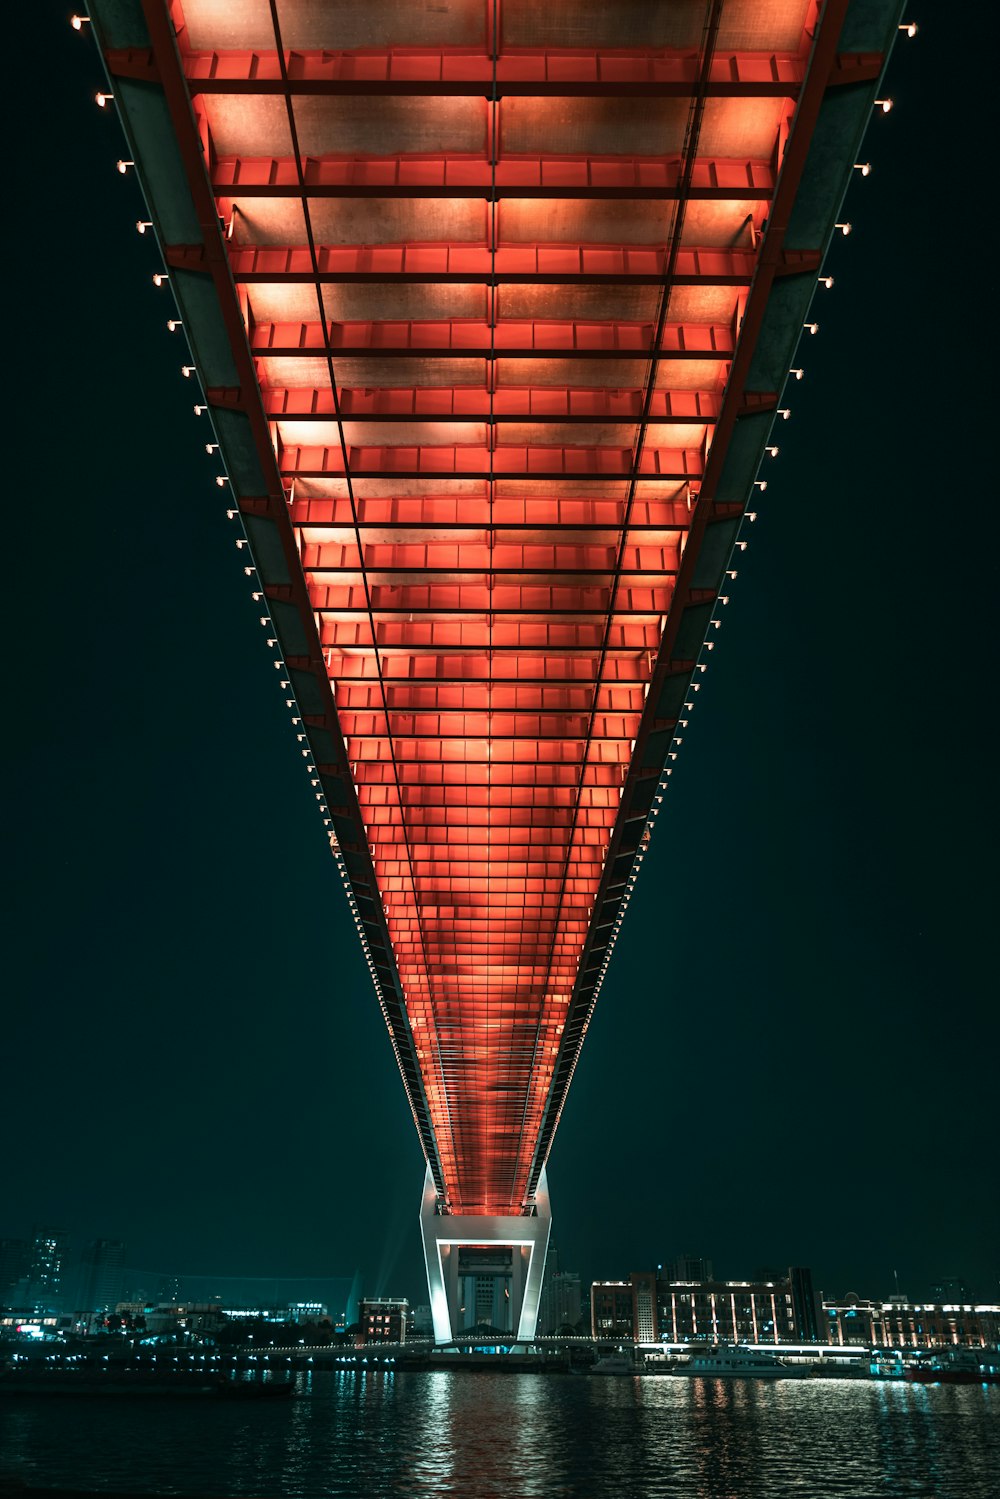 the underside of a bridge lit up at night